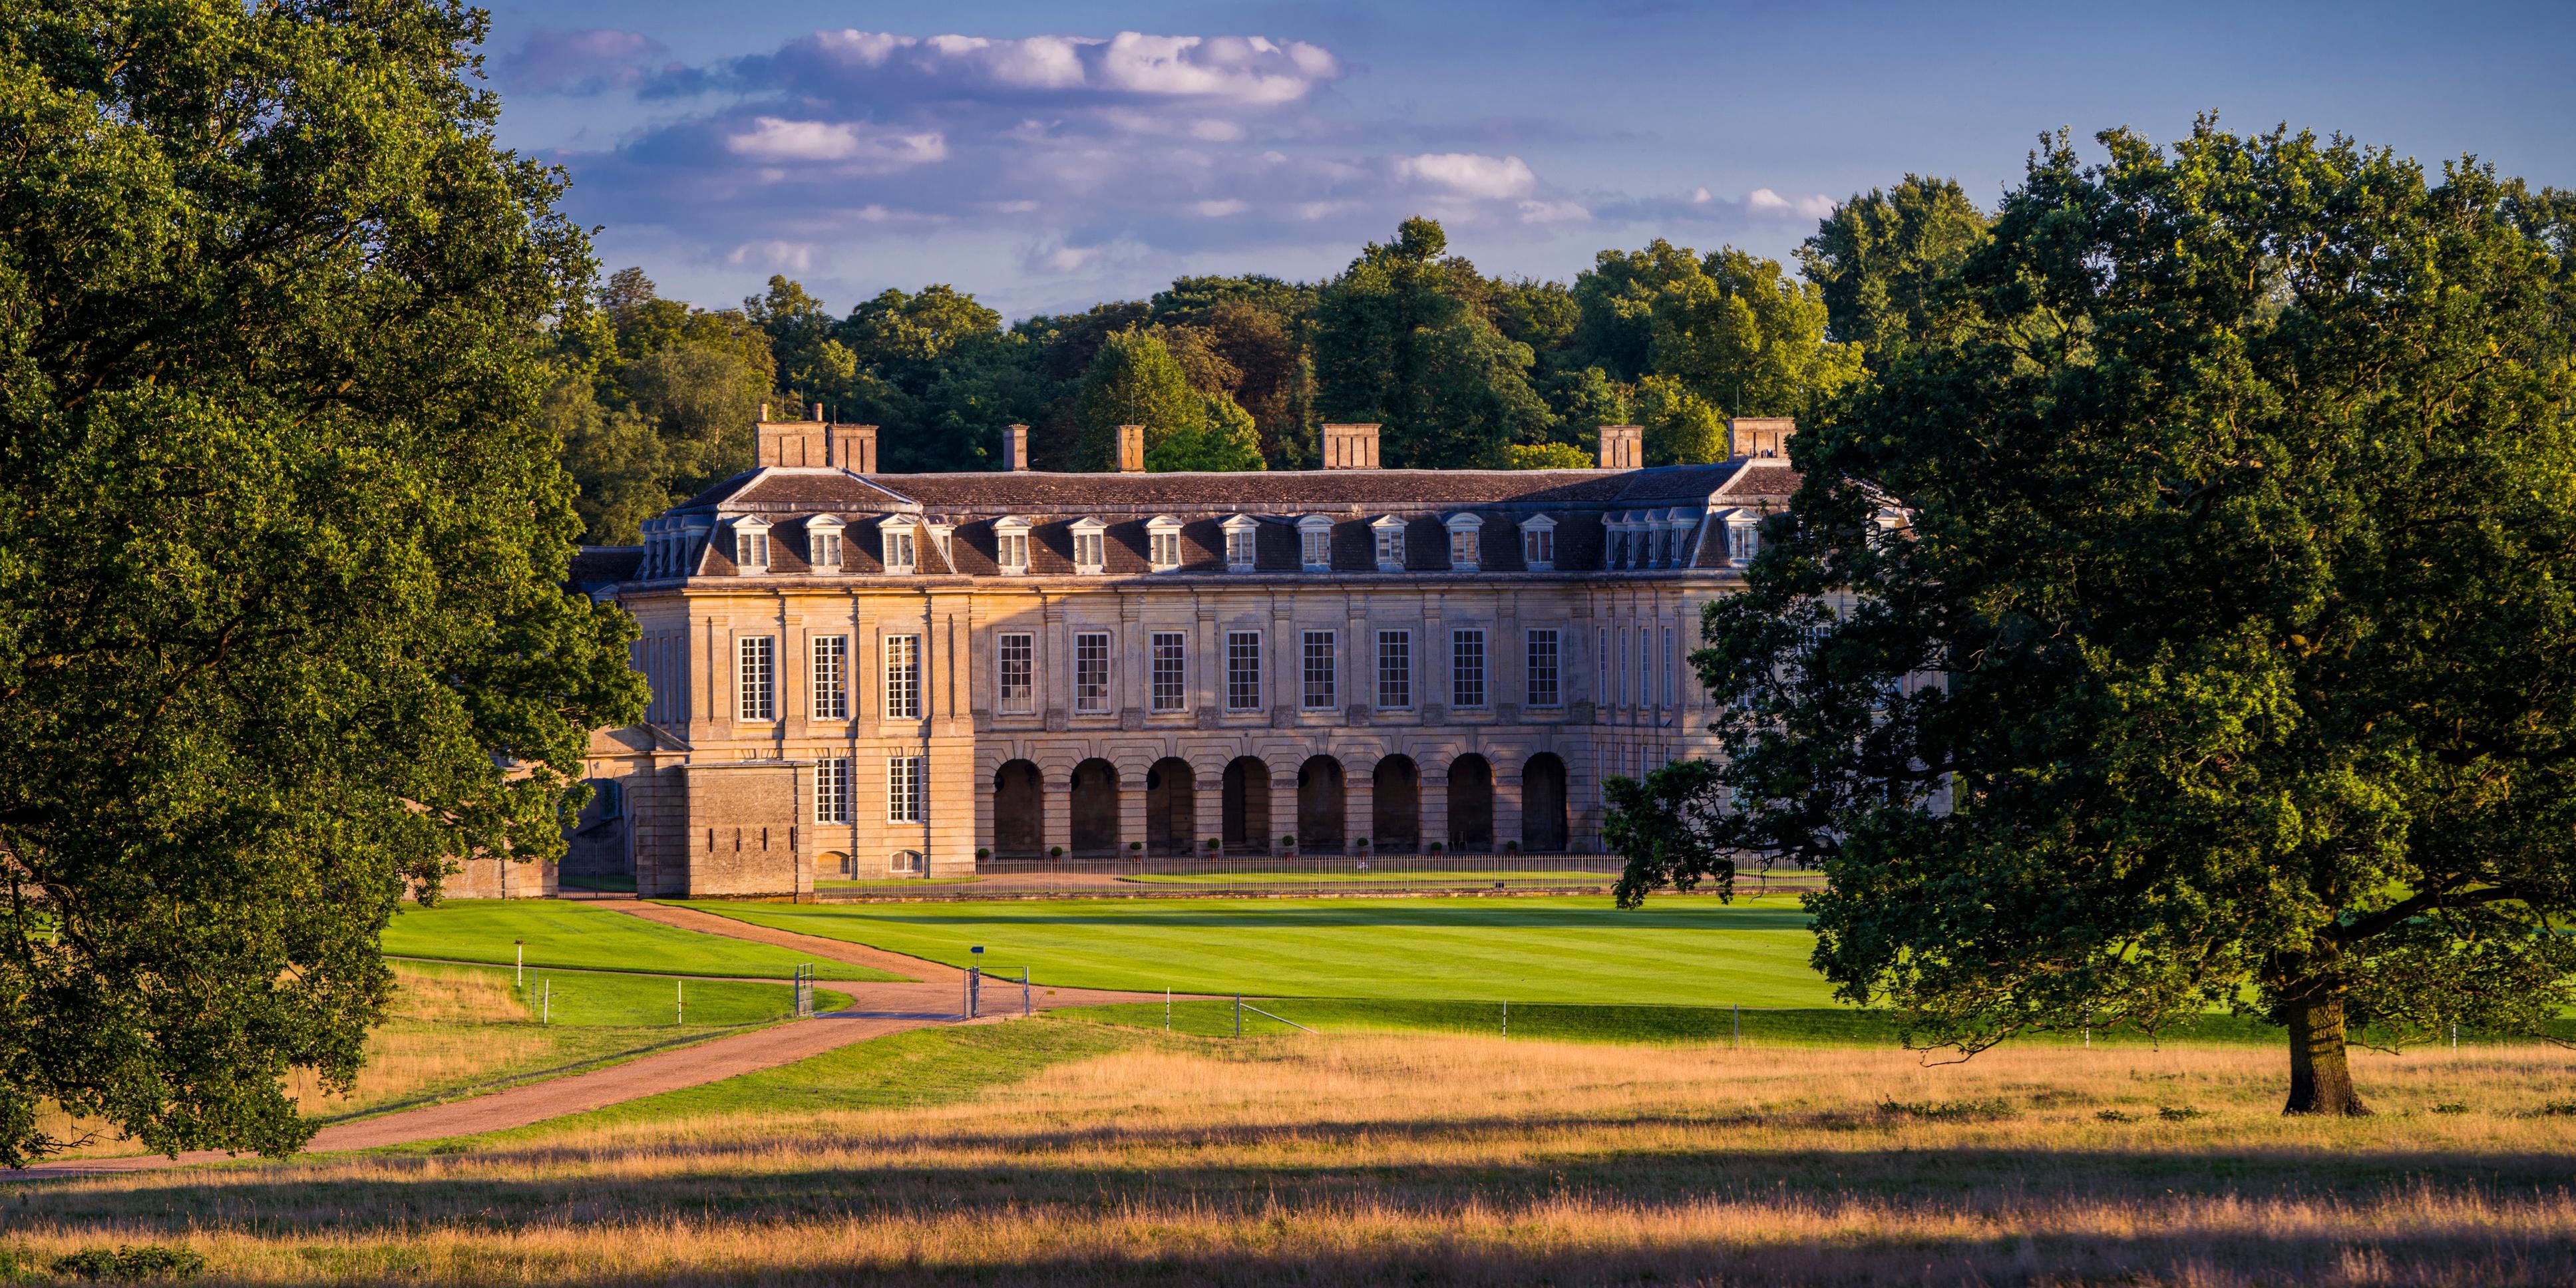 Famous for Les Miserables and the new Ridley Scott film Napoleon and also home of the Greenbelt Festival, Boughton House is ideally located just a 5 minute drive from the hotel. 1.9 miles away.